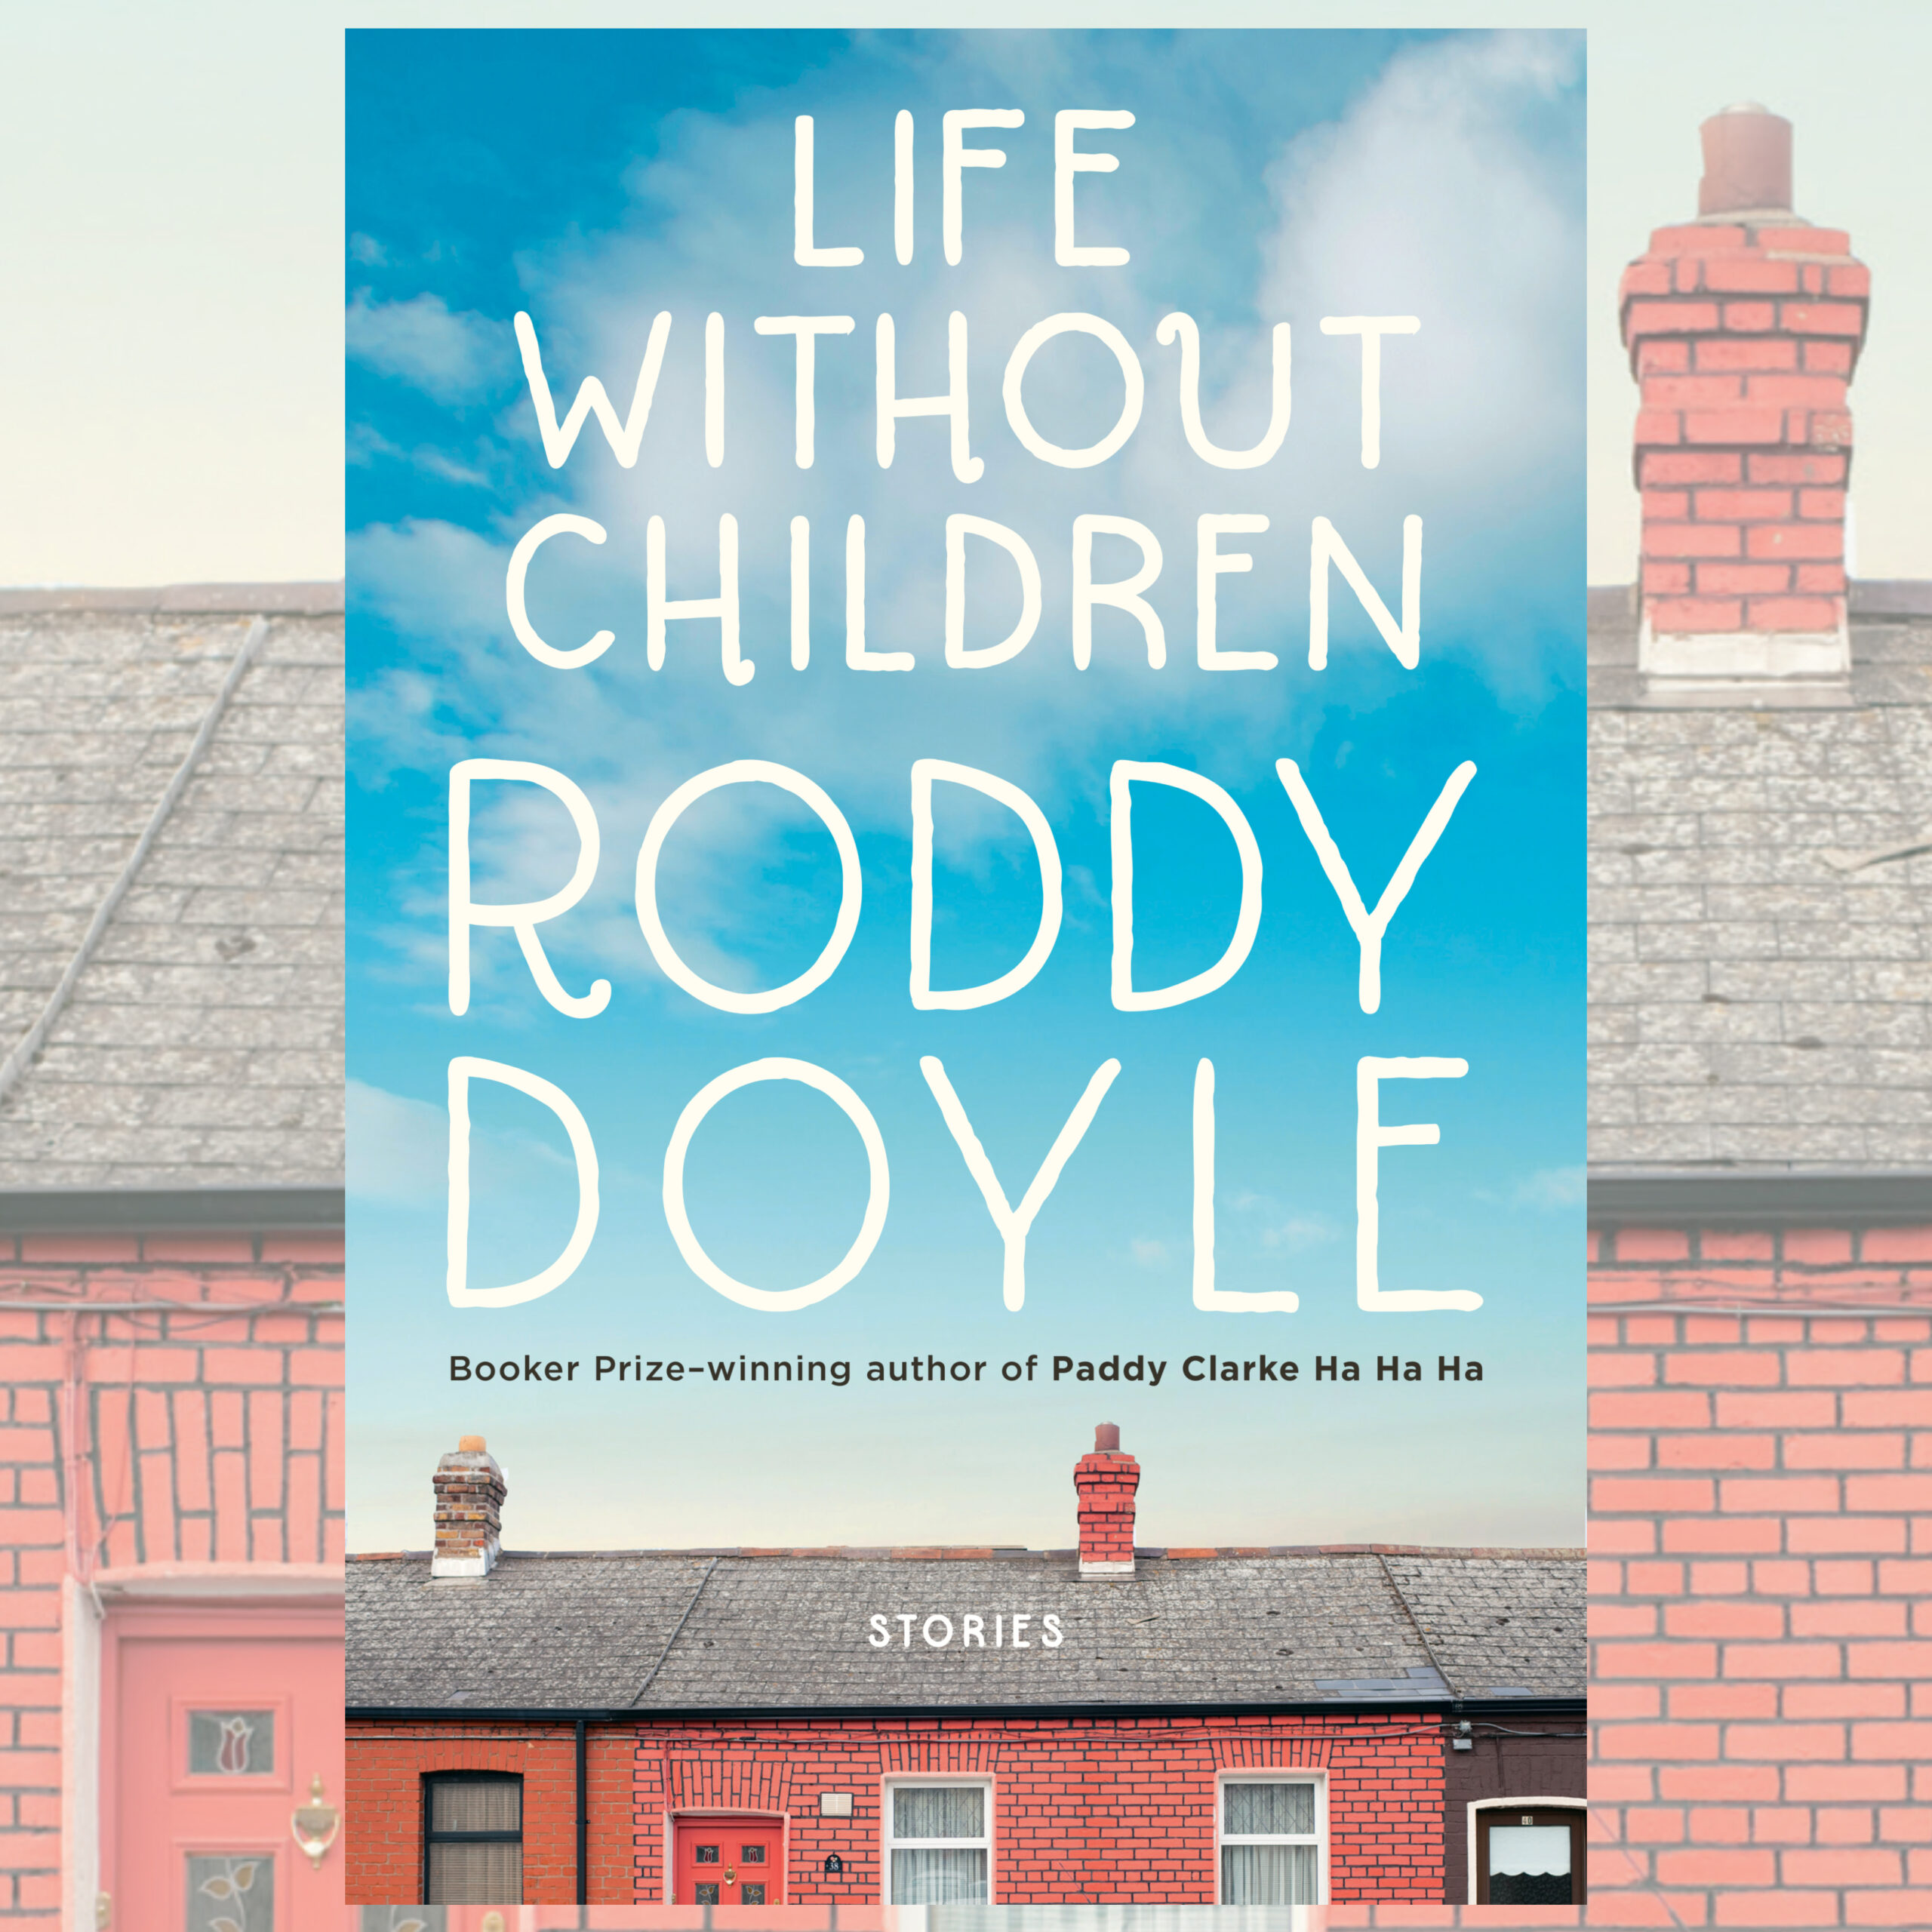 #1756: Roddy Doyle "Life Without Children" | The Book Show